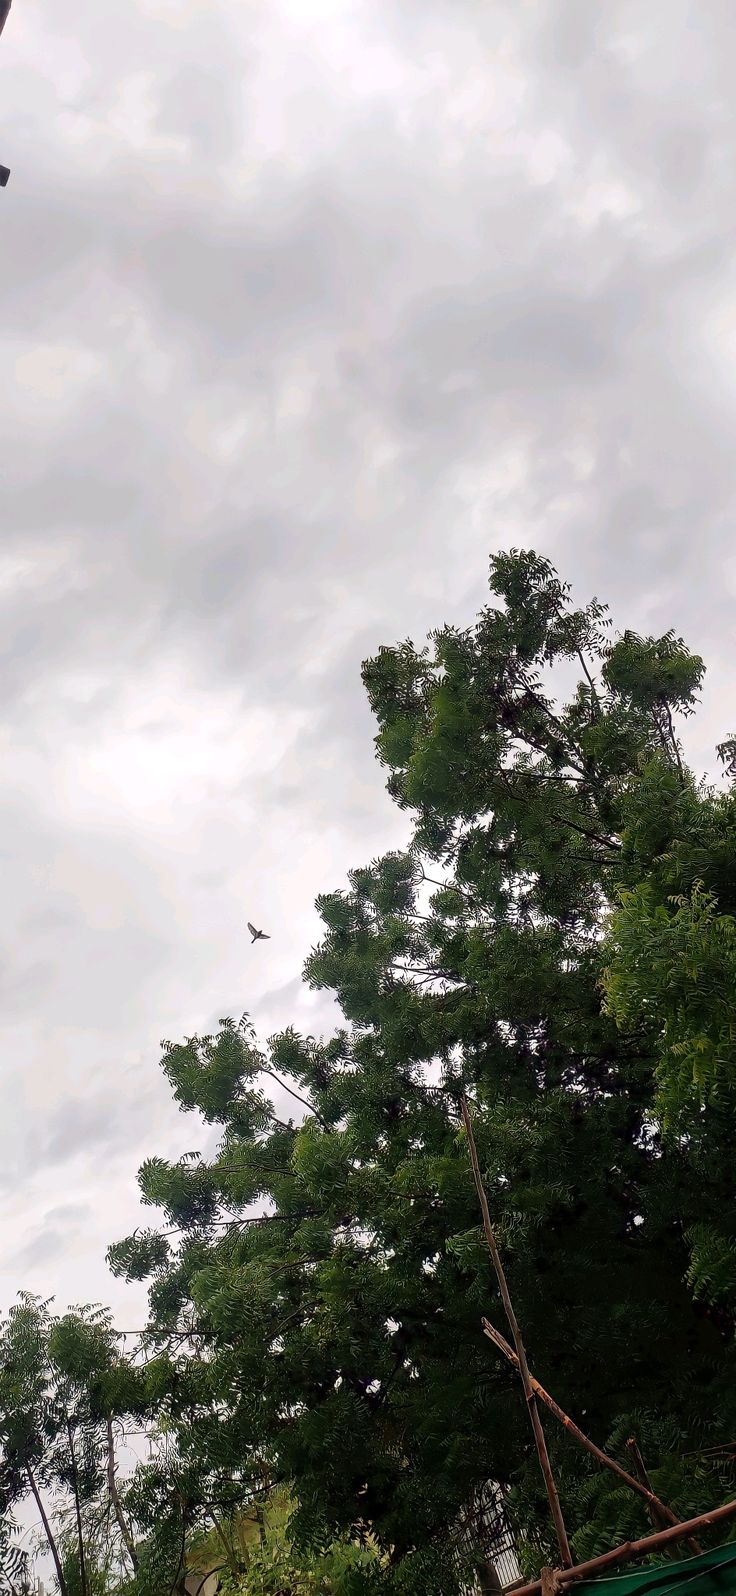 two birds flying in the sky above some trees